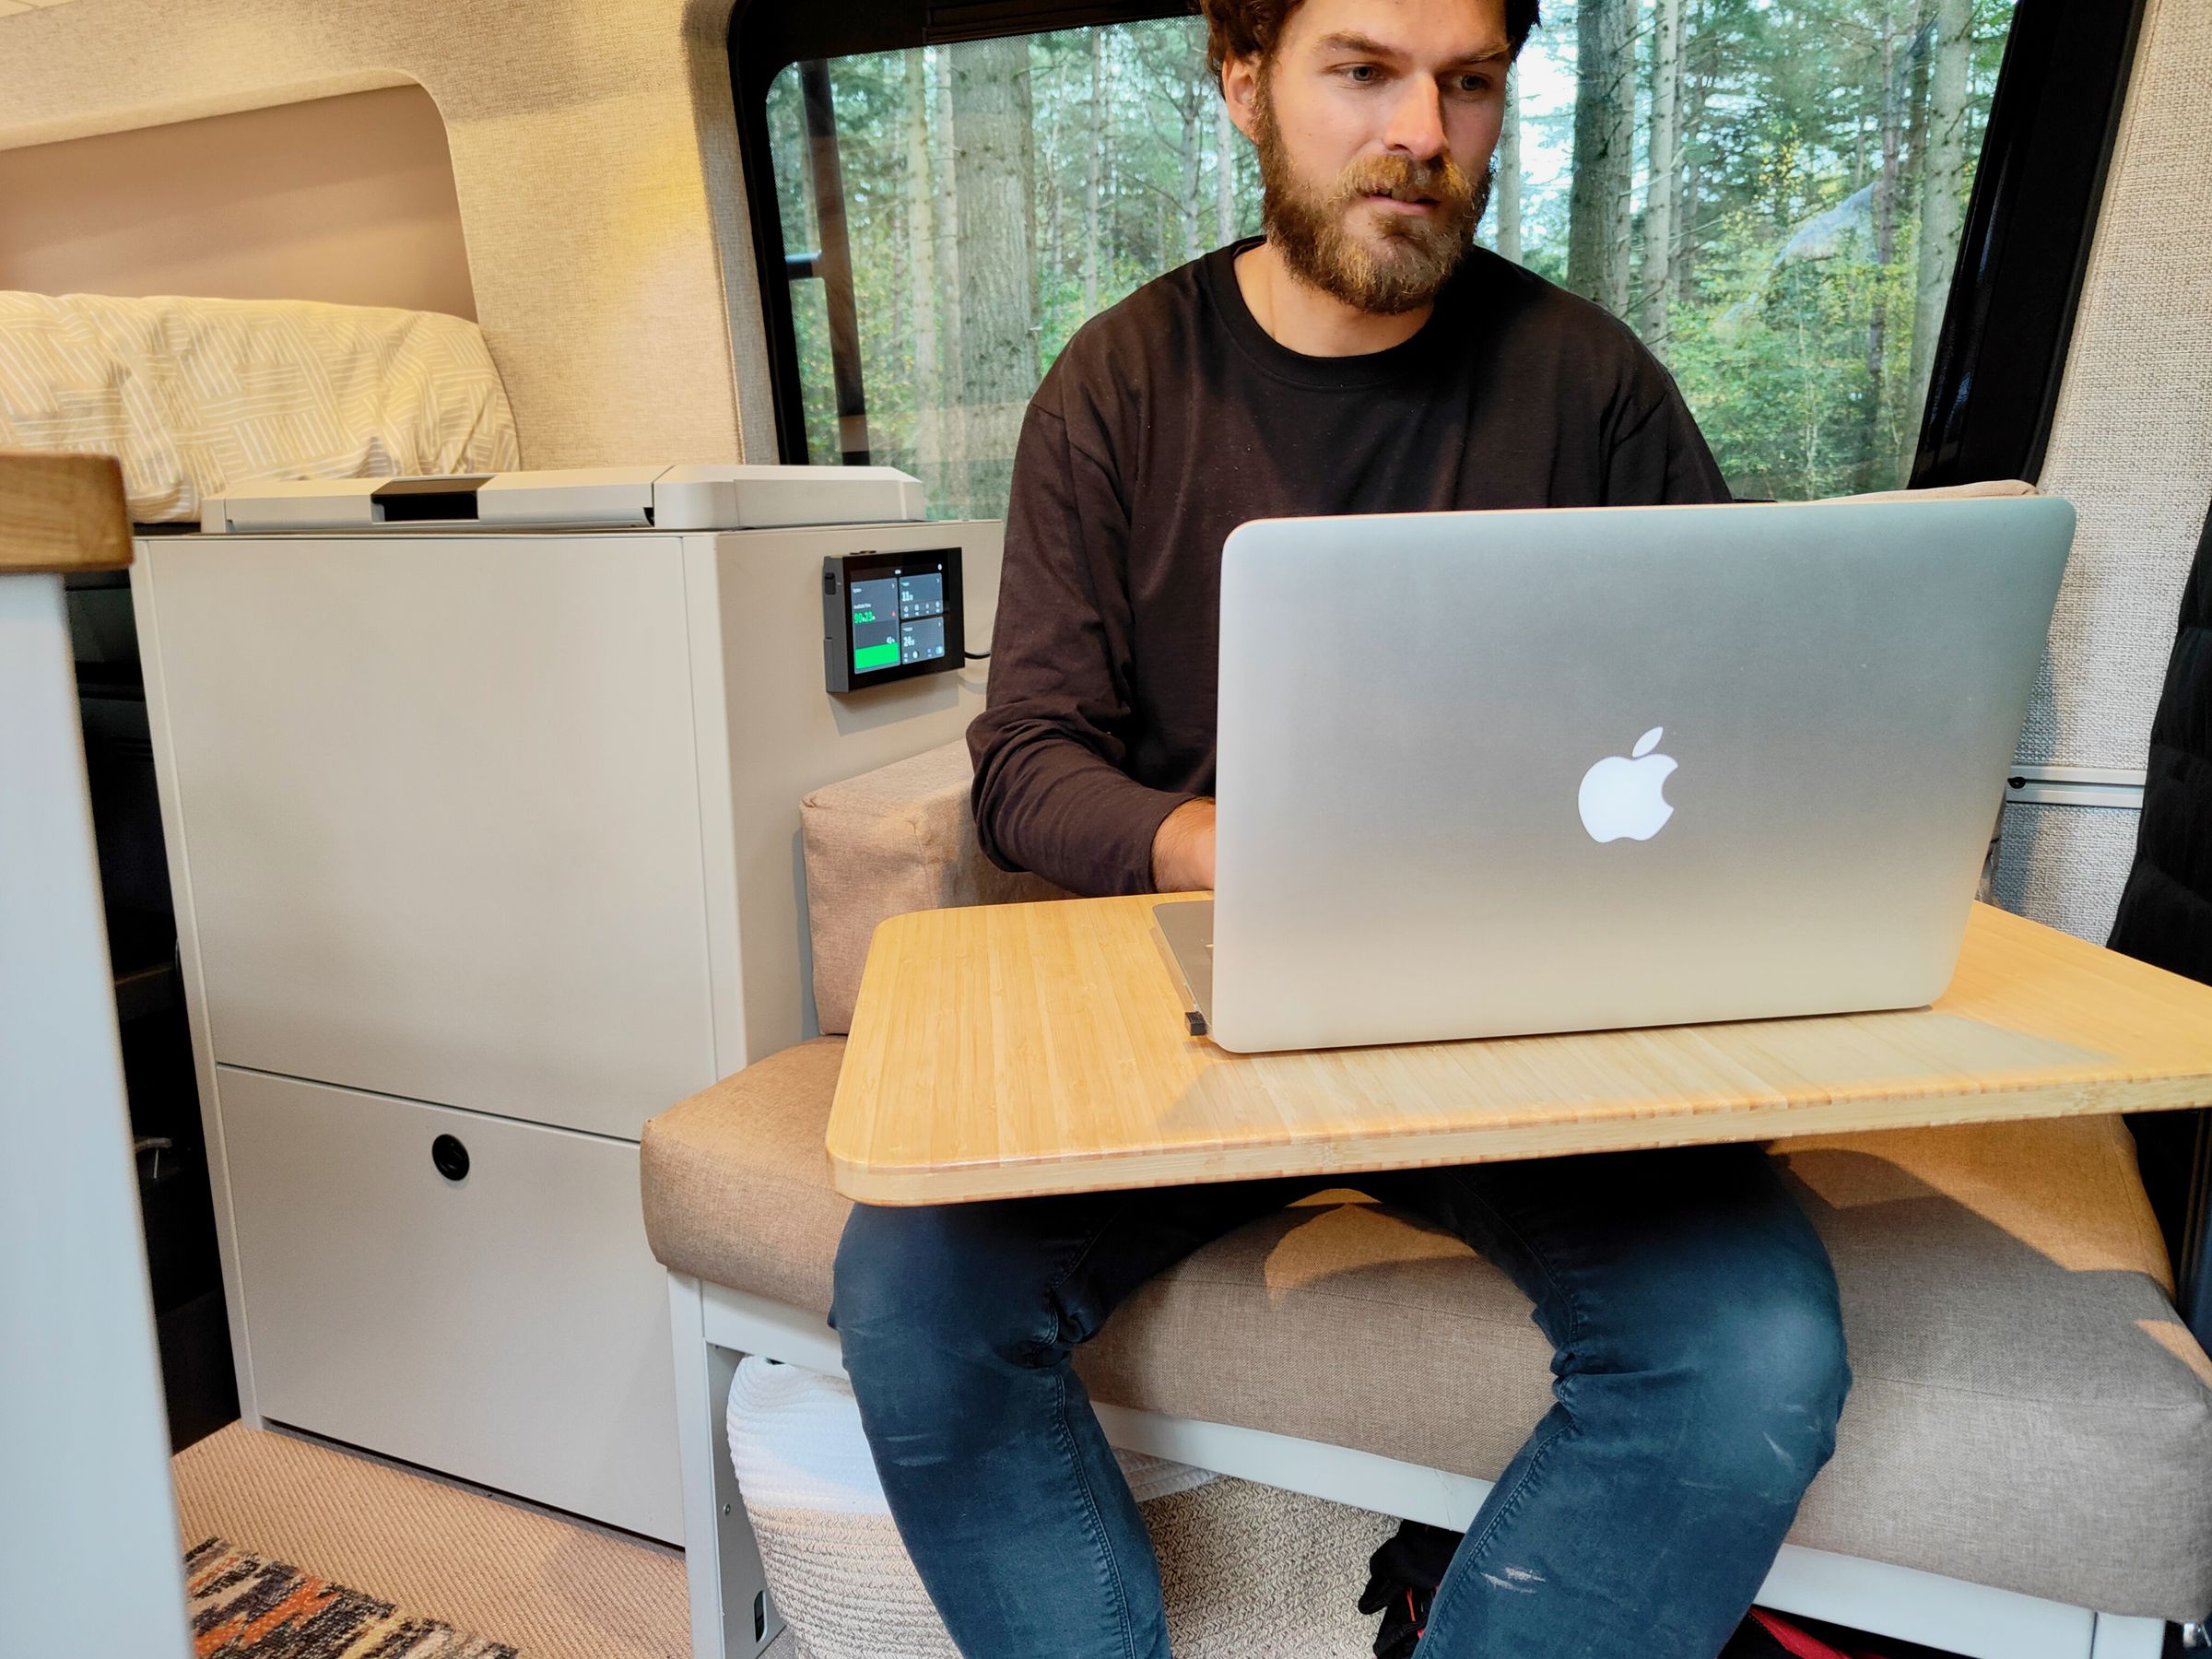 Fabian working from his van with the EcoFlow console showing charge status behind him.